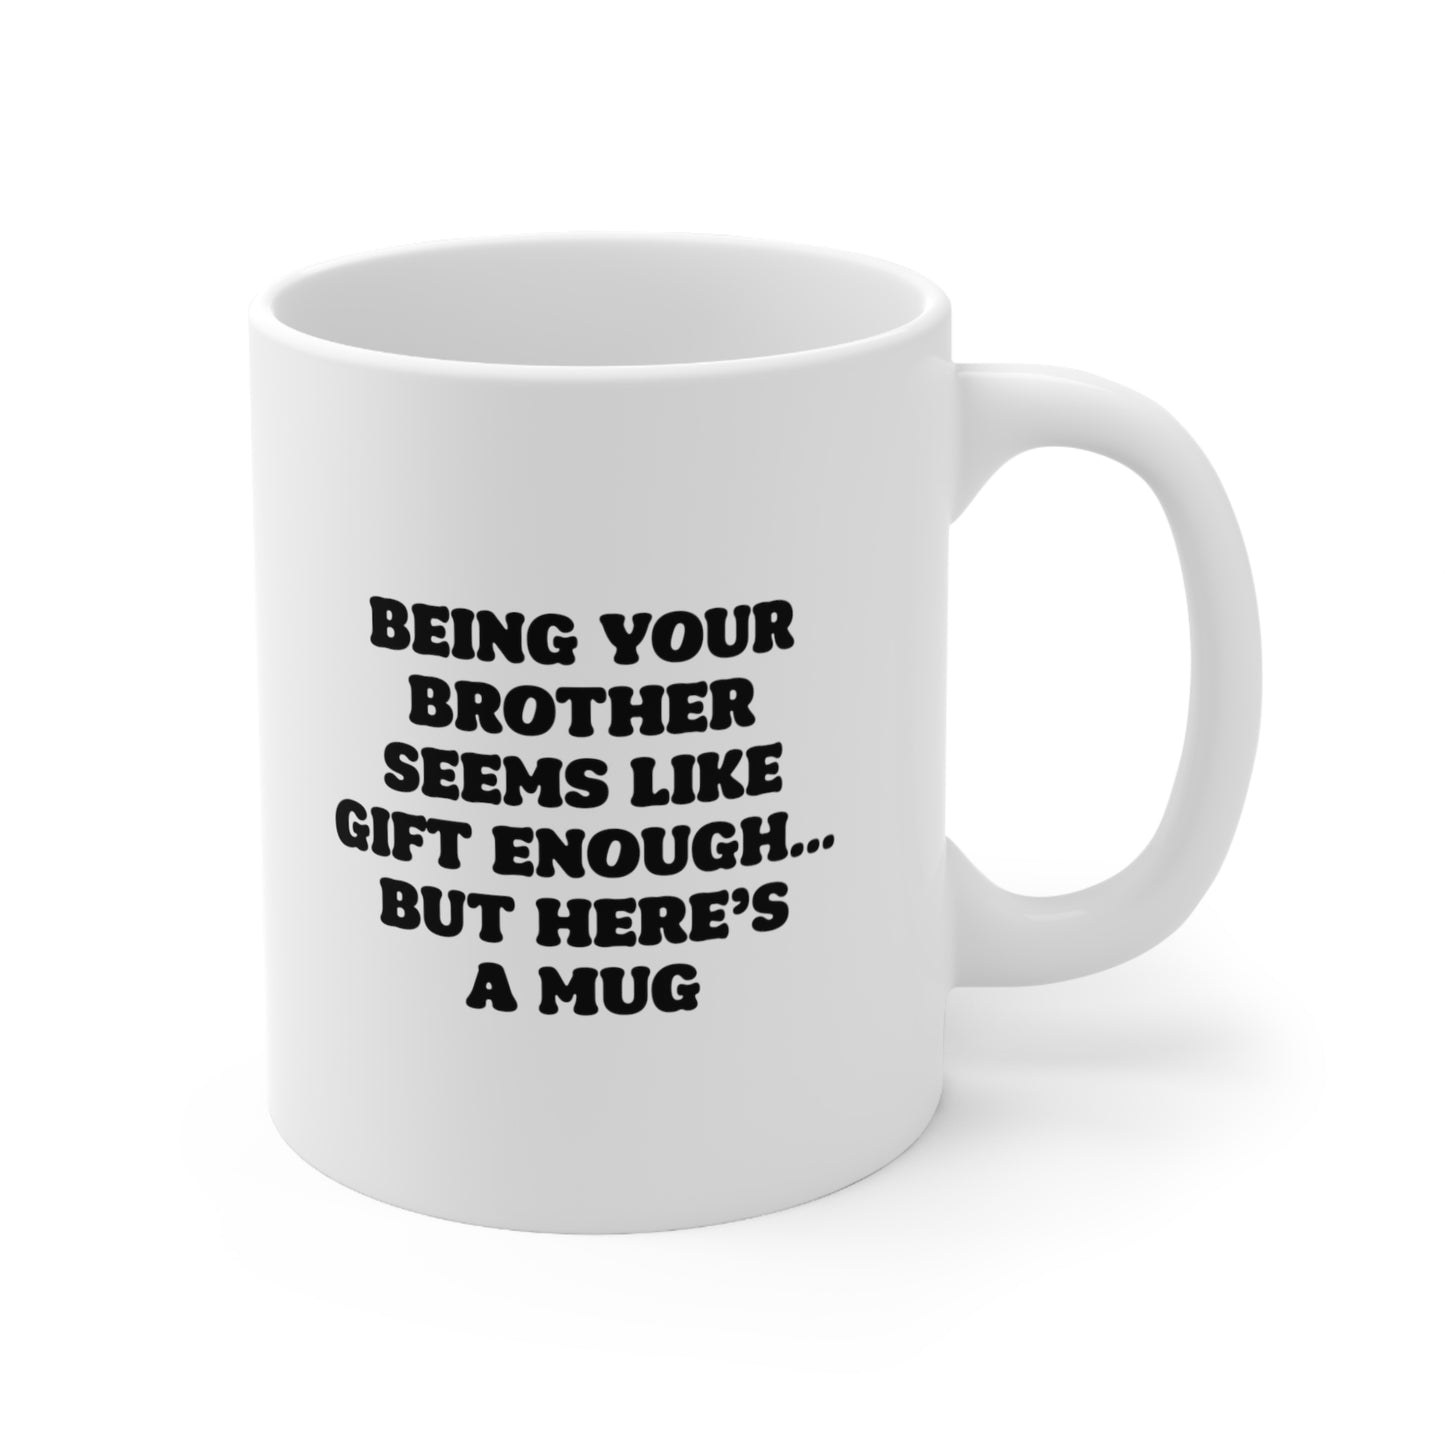 Being your brother seems like gift enough but here's a mug 11oz